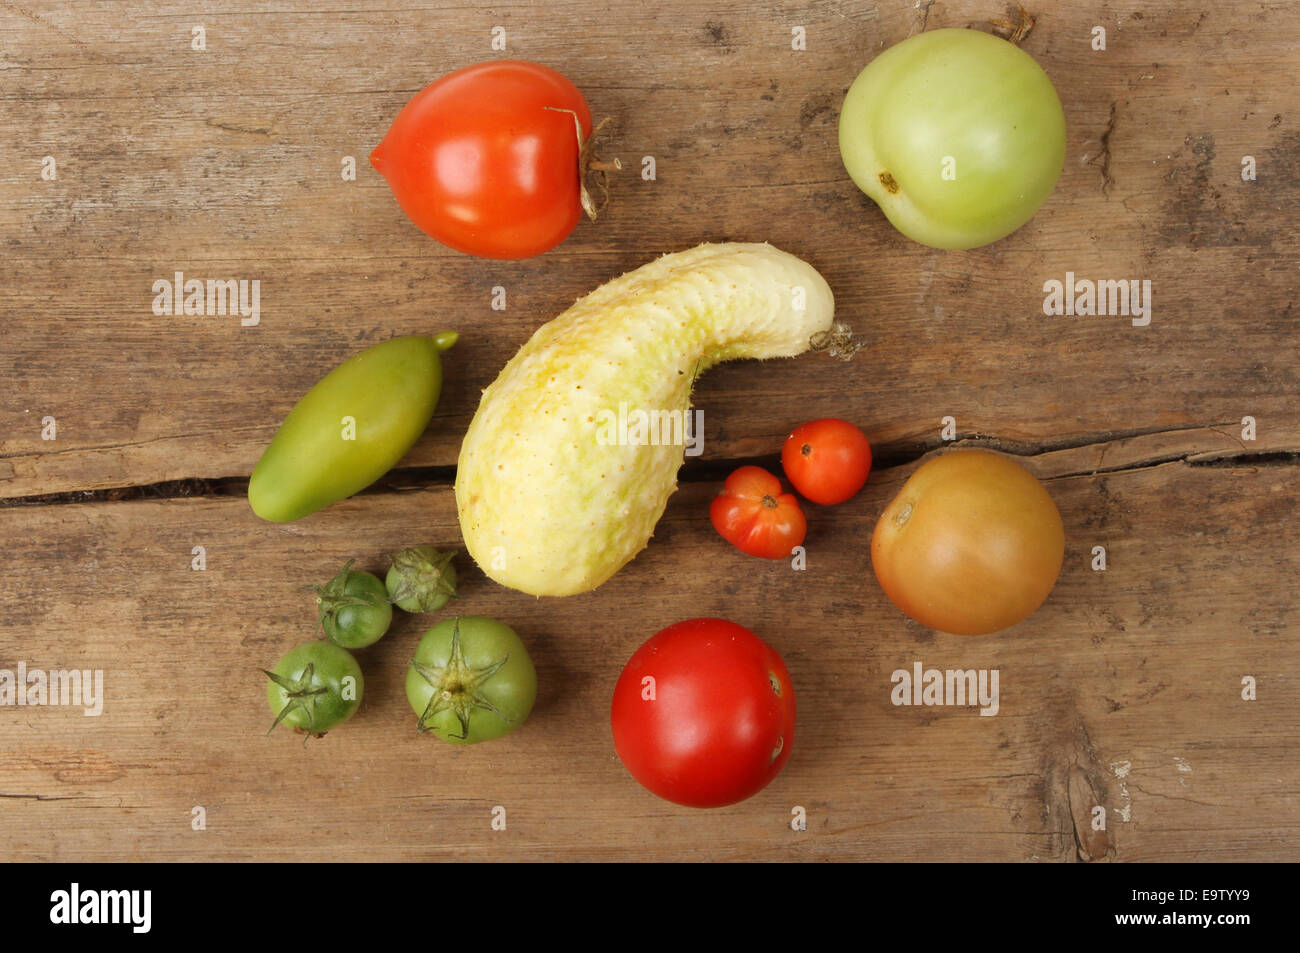 Selection of ripe and unripe homegrown tomatoes and cucumber on a wooden board Stock Photo